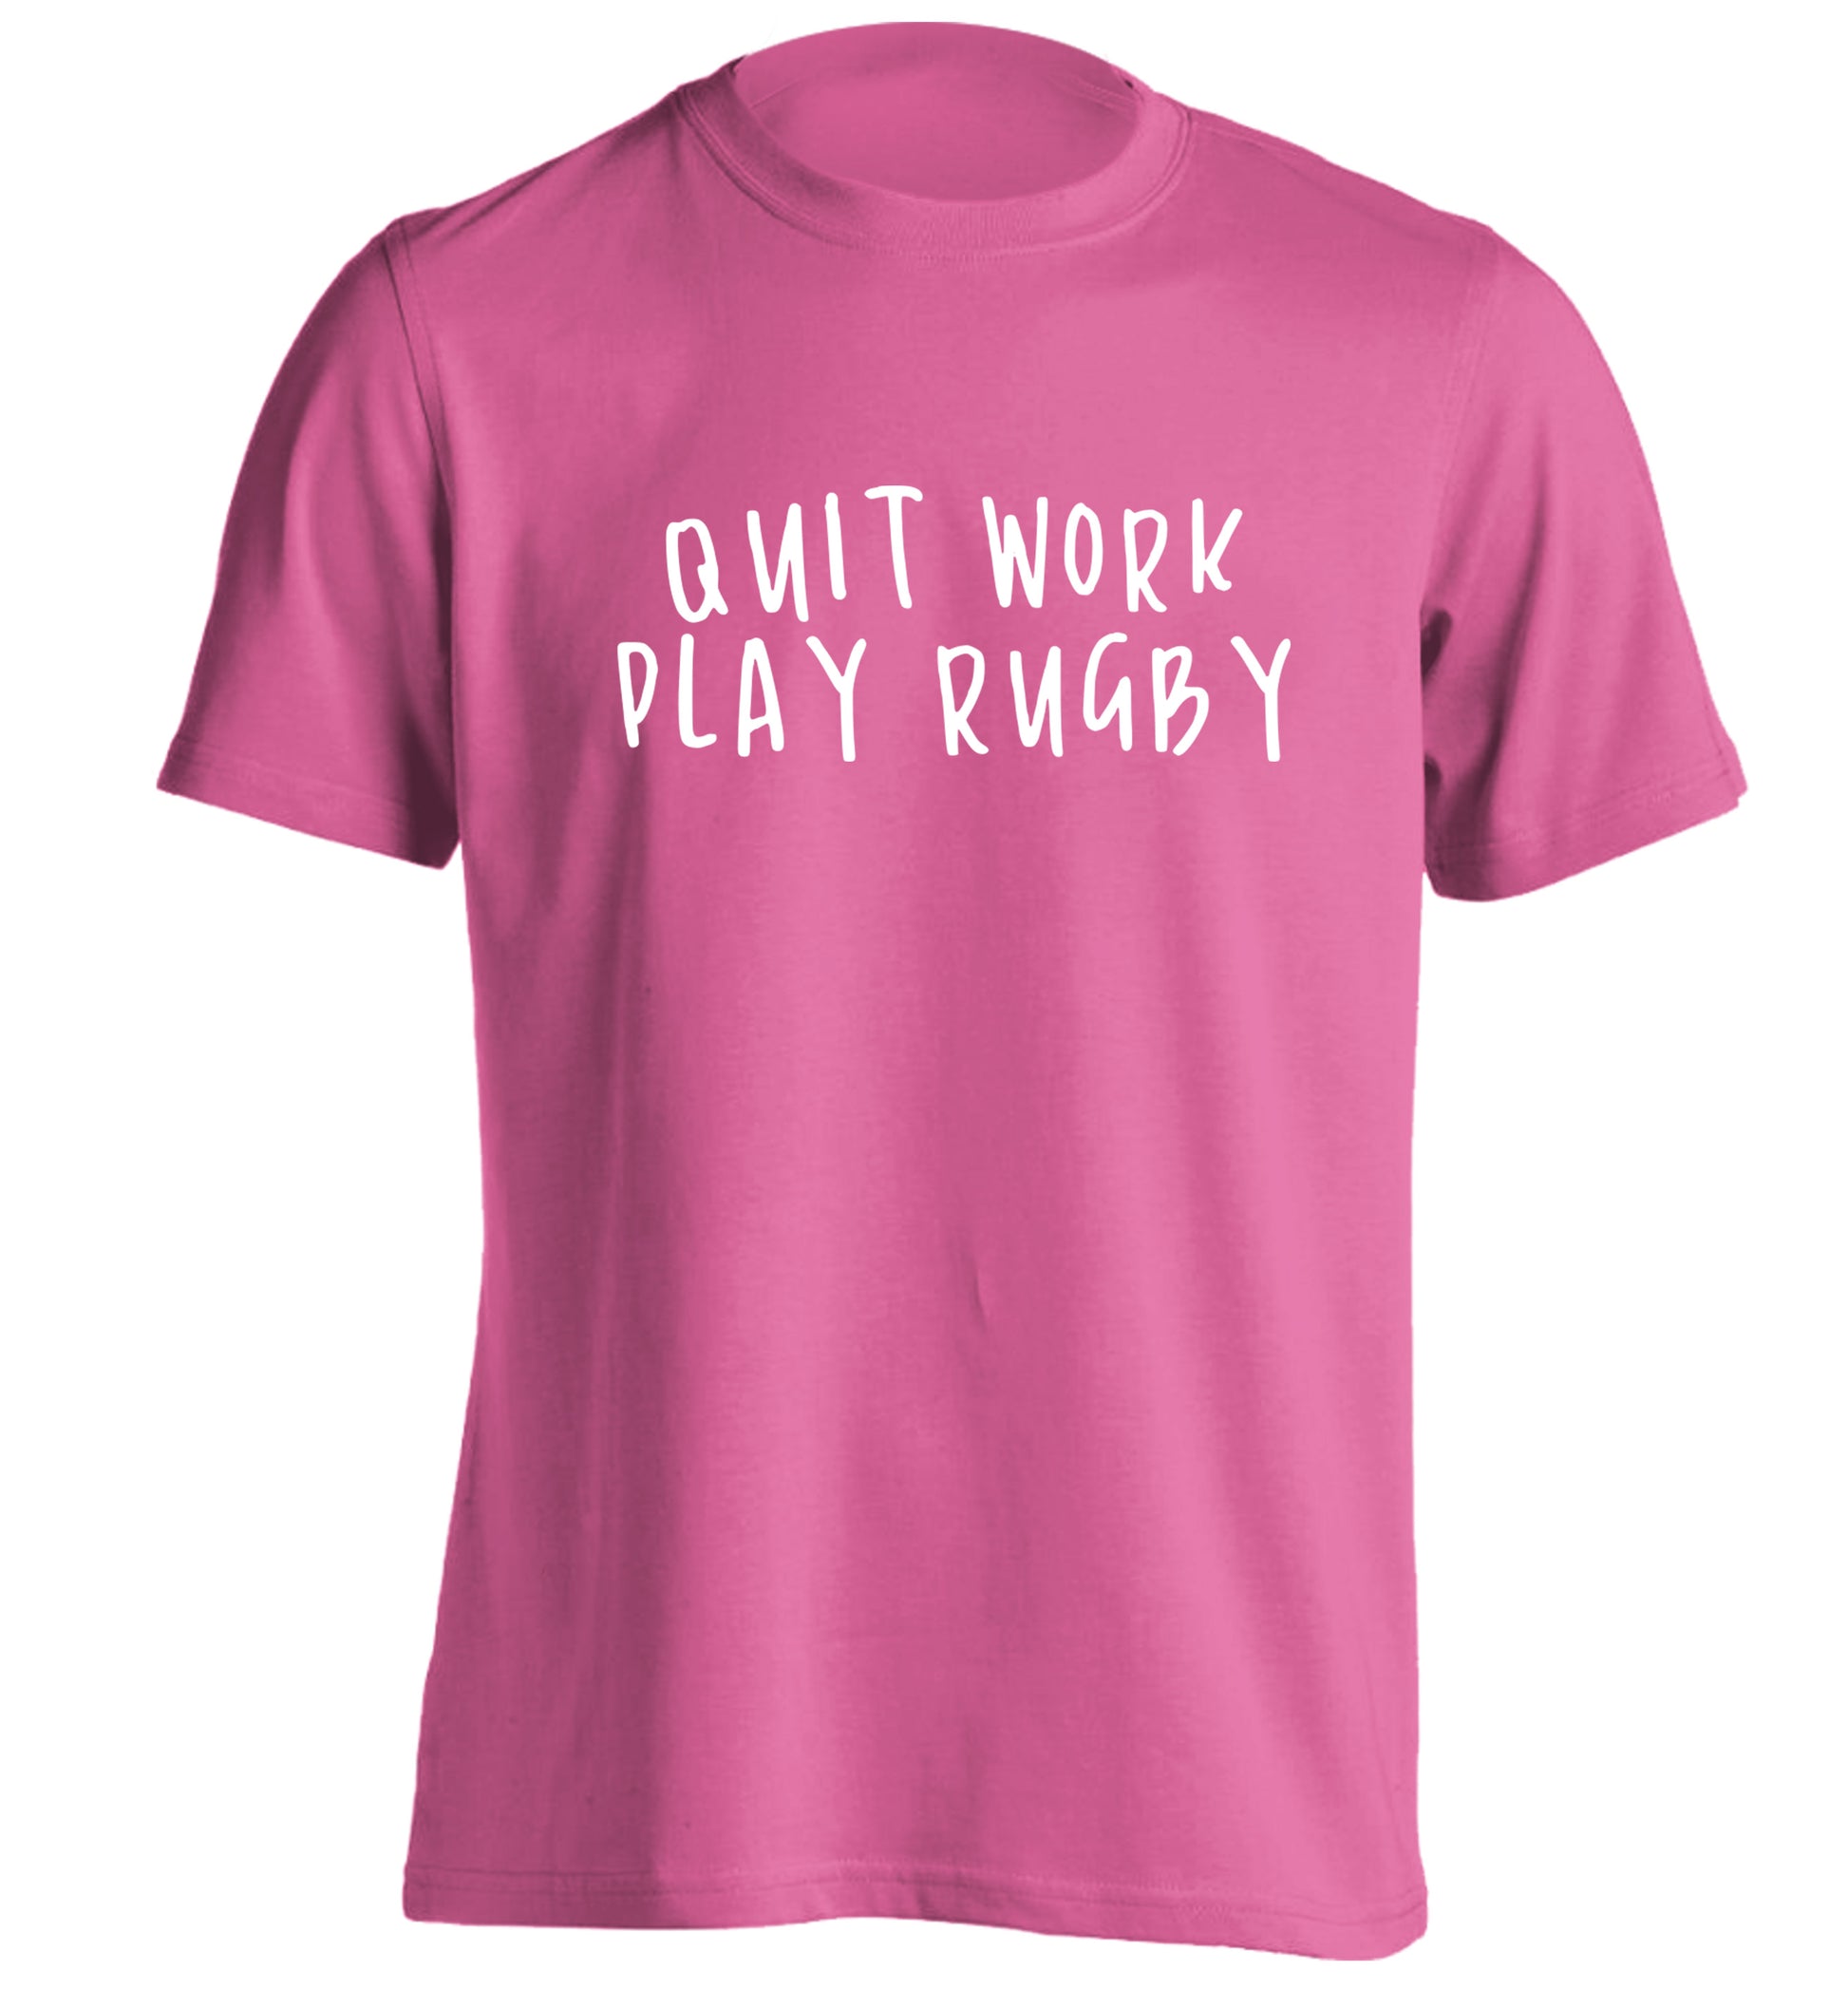 Quit work play rugby adults unisex pink Tshirt 2XL